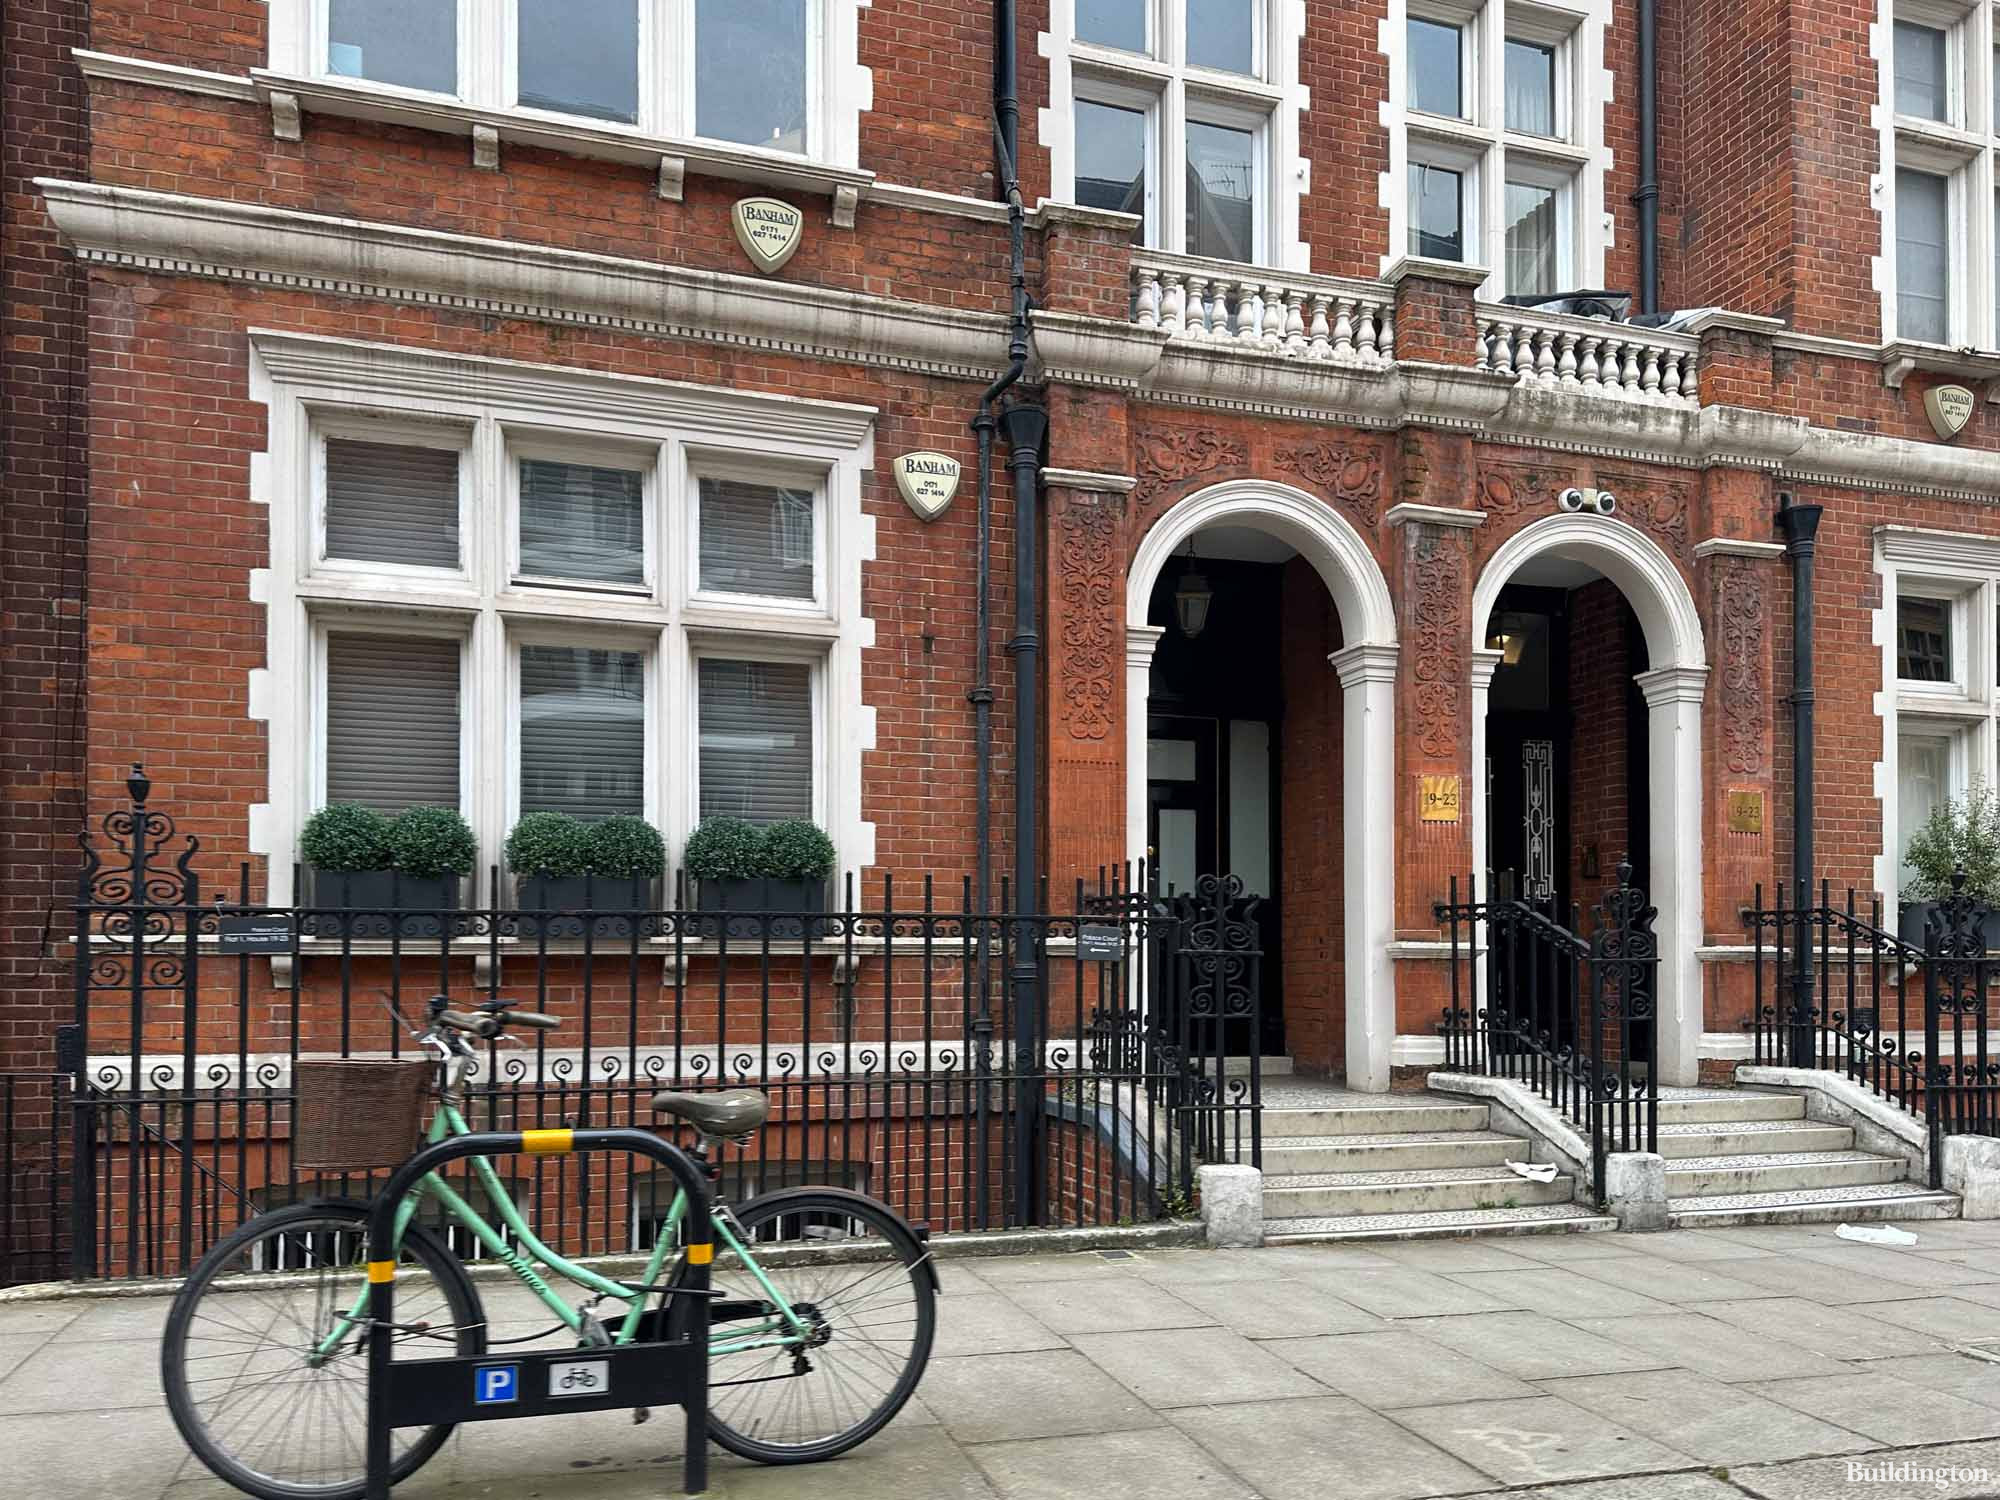 19-23 Palace Court in Bayswater, London W2